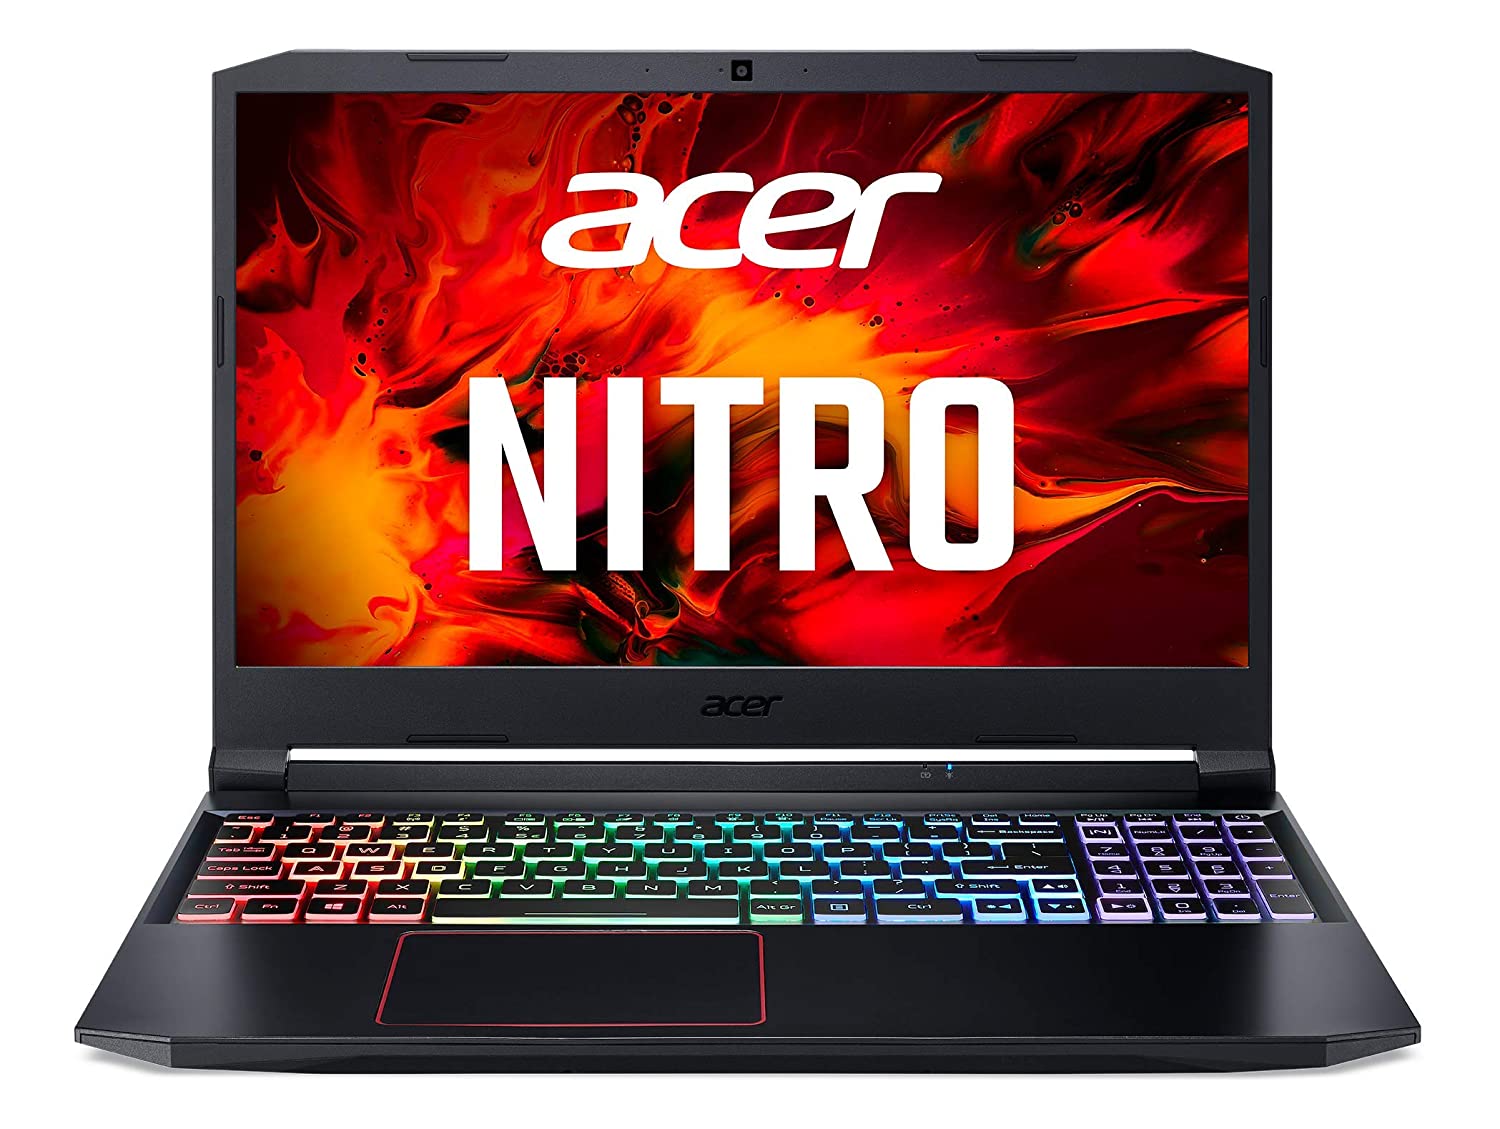 Acer Nitro 5 Intel Core i5-10th Gen 15.6-inch (39.62 cms) Display T&L Gaming Laptop 